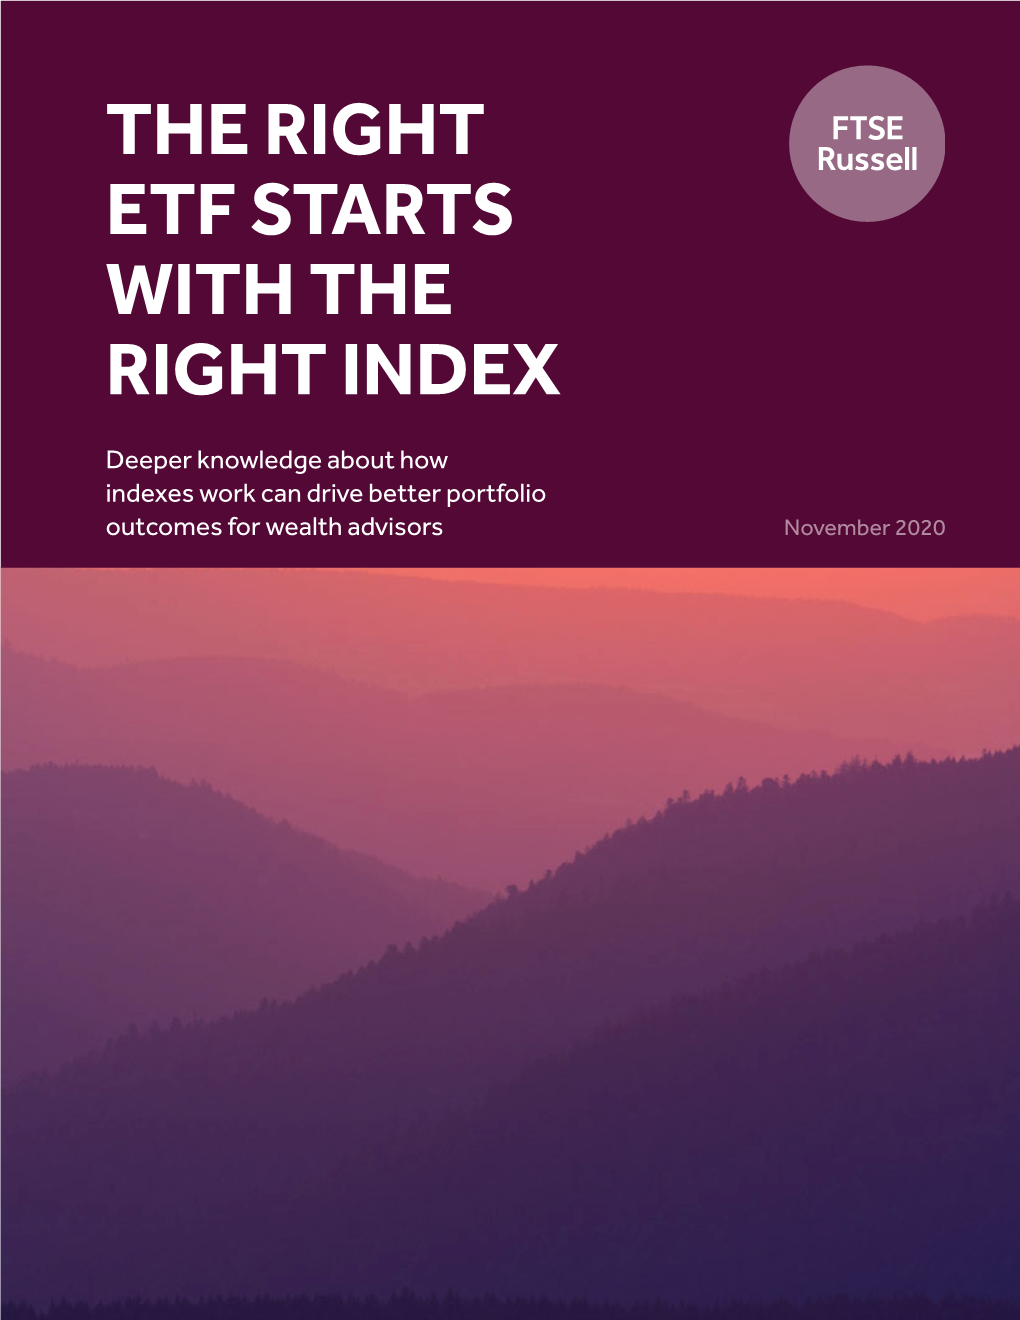 The Right Etf Starts with the Right Index